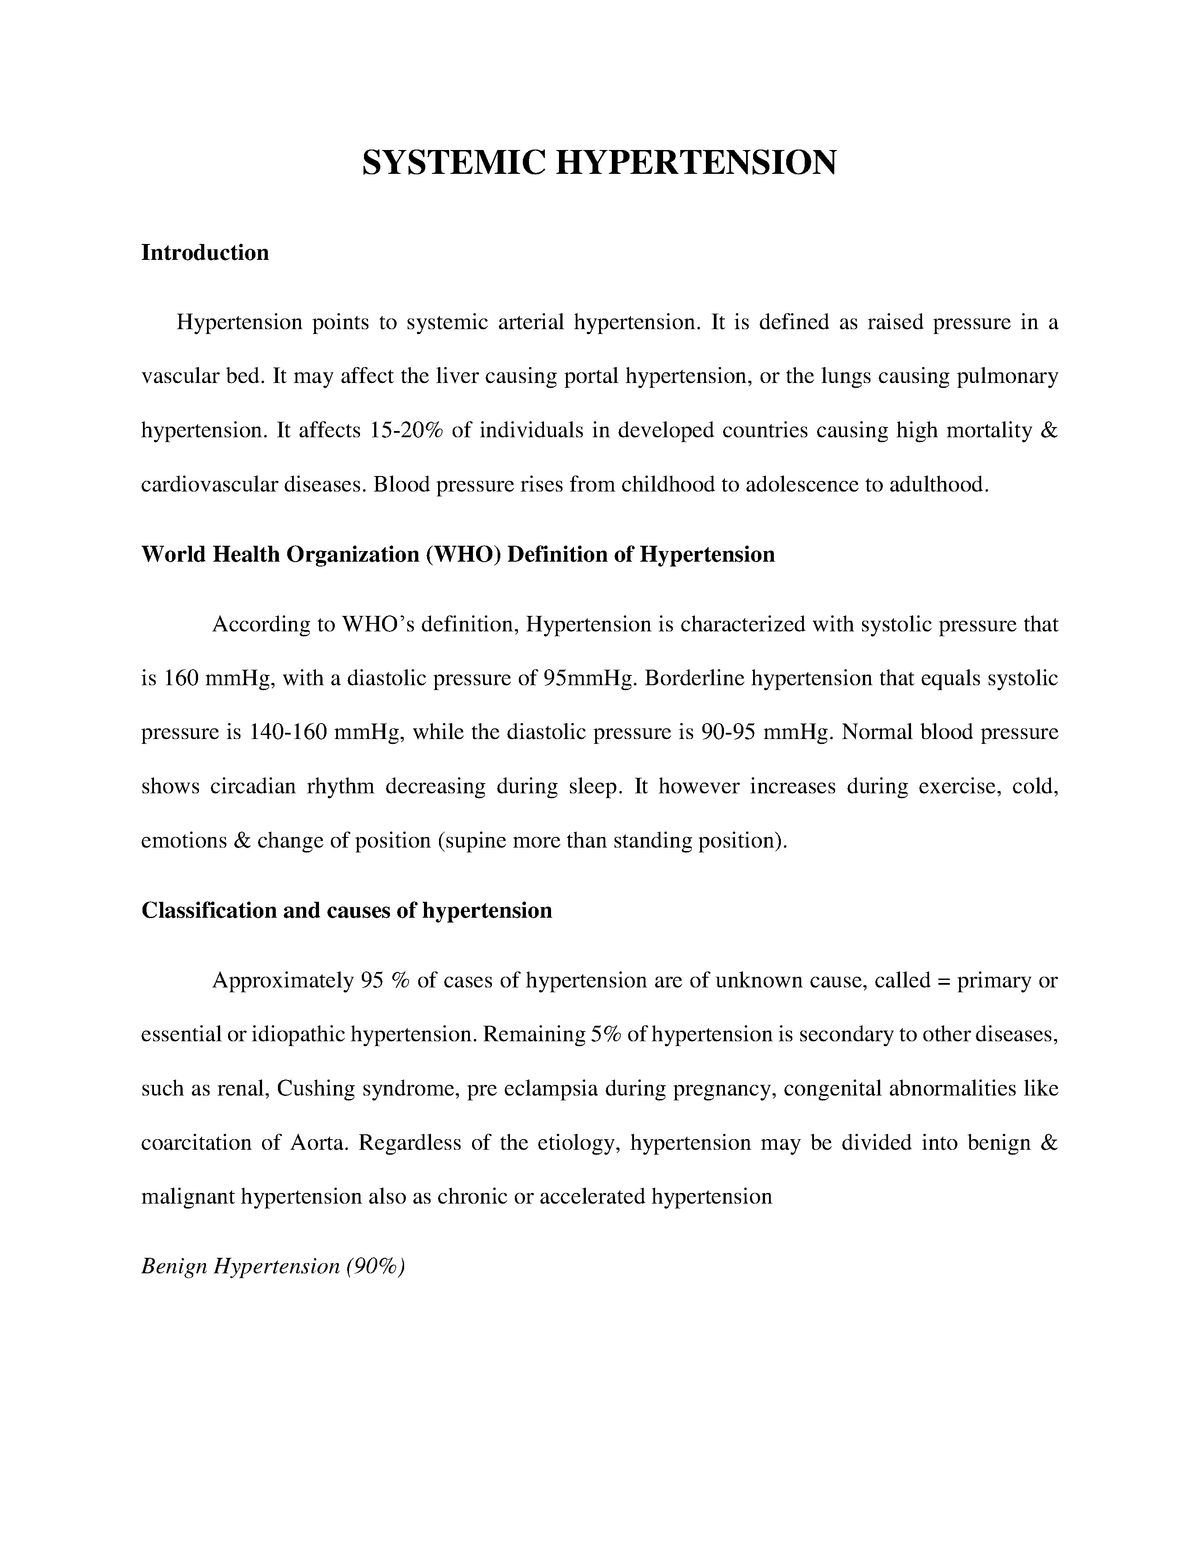 hypertension thesis introduction